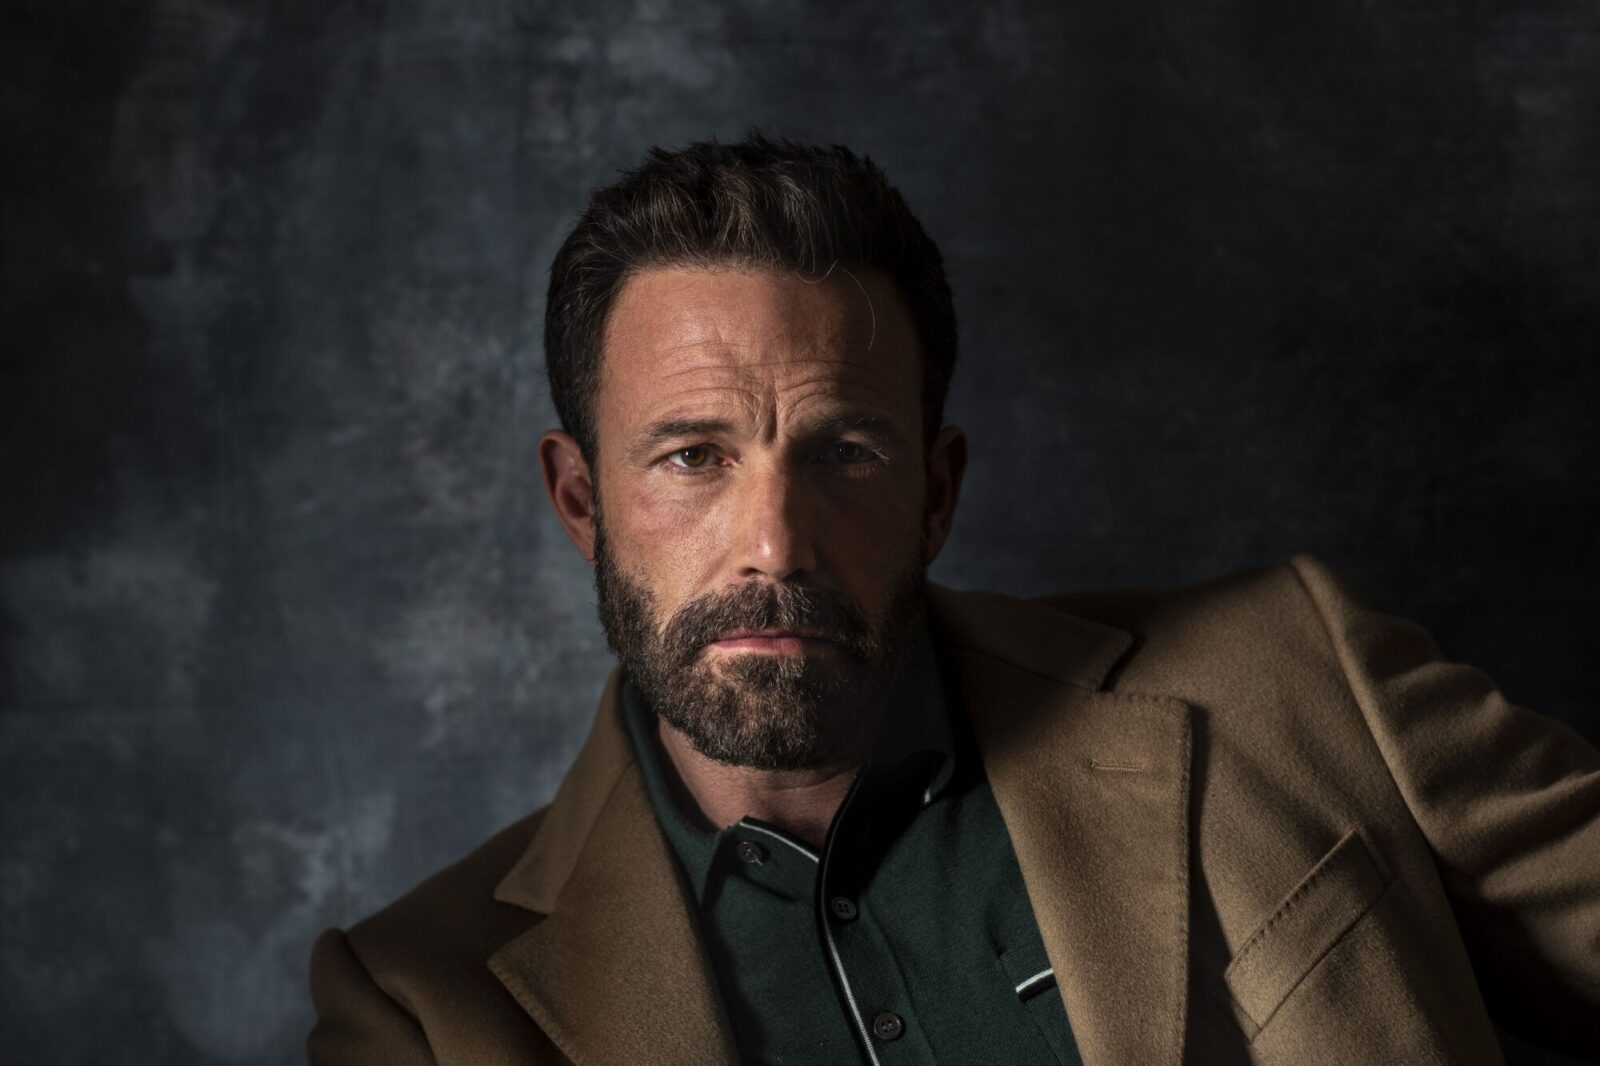 Did This Actor Appear in a DC or Marvel Movie? Ben Affleck